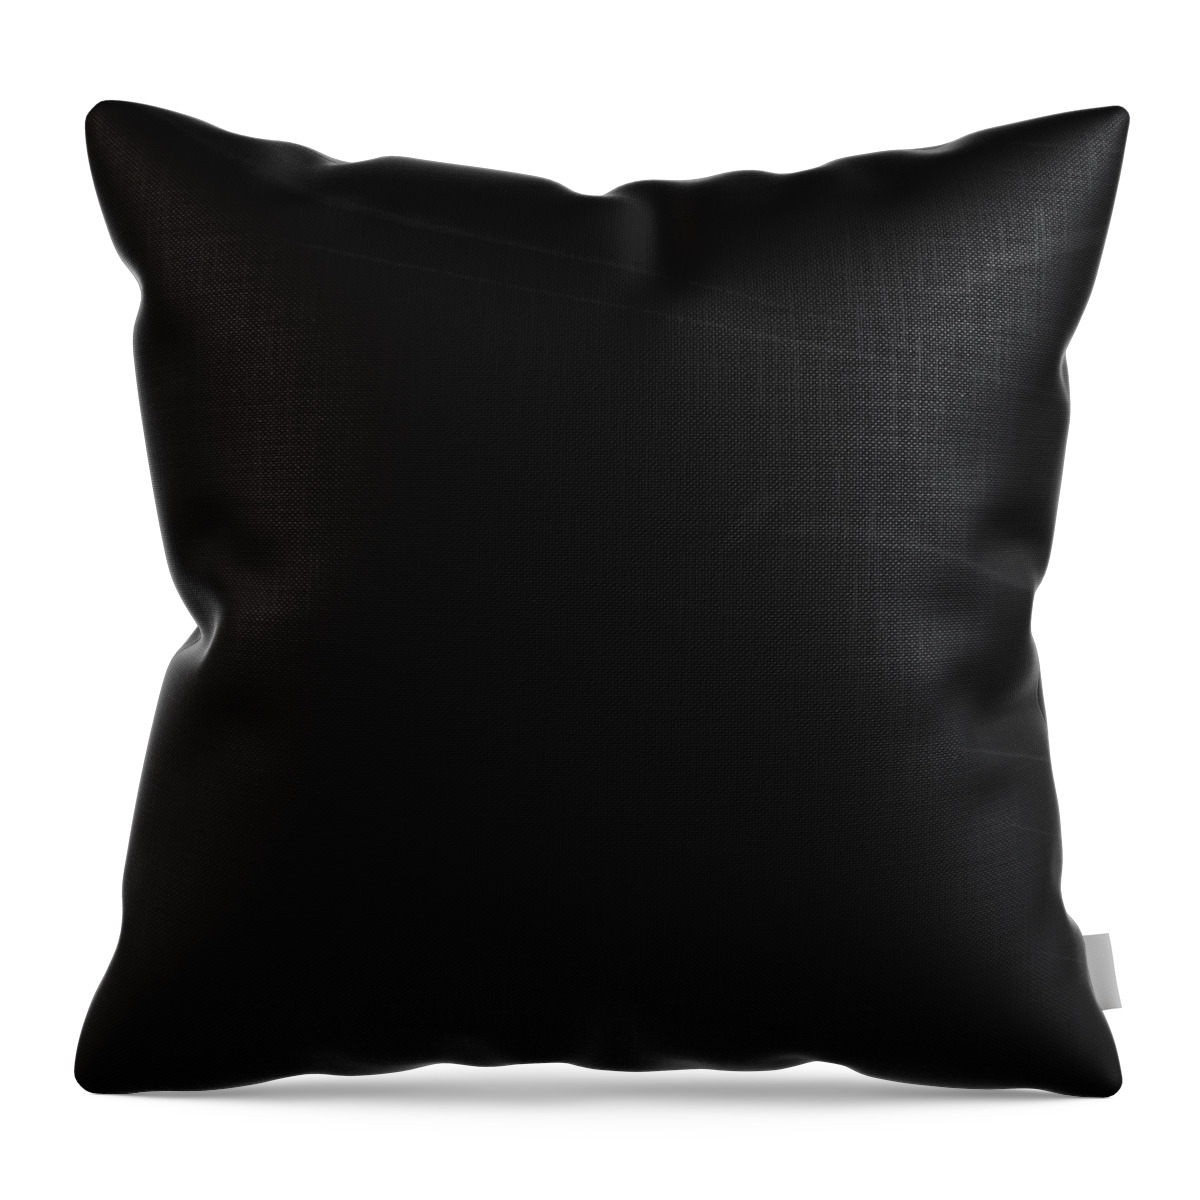  Throw Pillow featuring the photograph in Action by Gianfranco Weiss